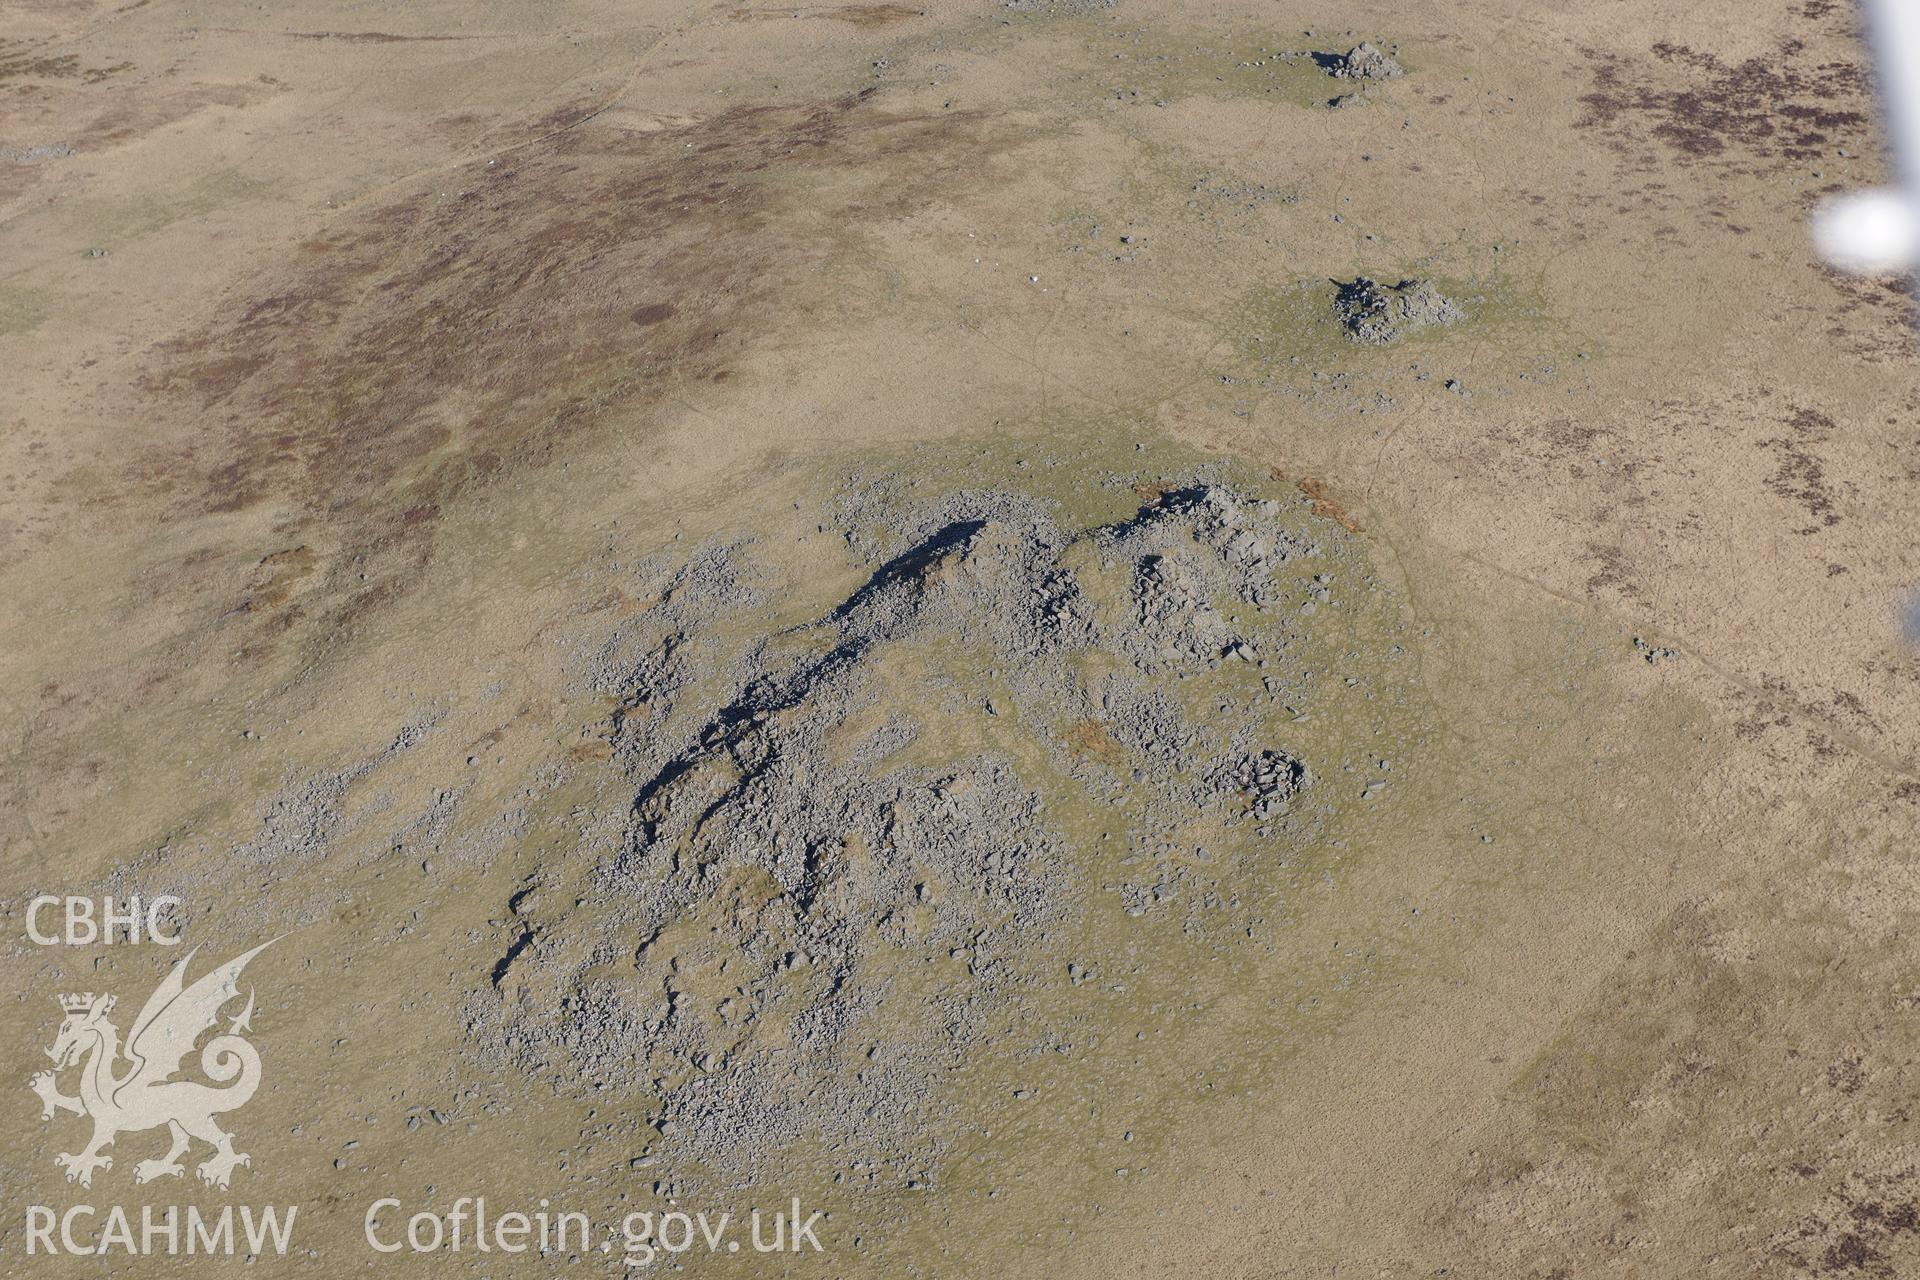 Carn Breseb on the eastern slopes of Mynydd Preseli, west of Crymych, Pembrokeshire. Oblique aerial photograph taken during the Royal Commission?s programme of archaeological aerial reconnaissance by Toby Driver on 2nd April 2013.